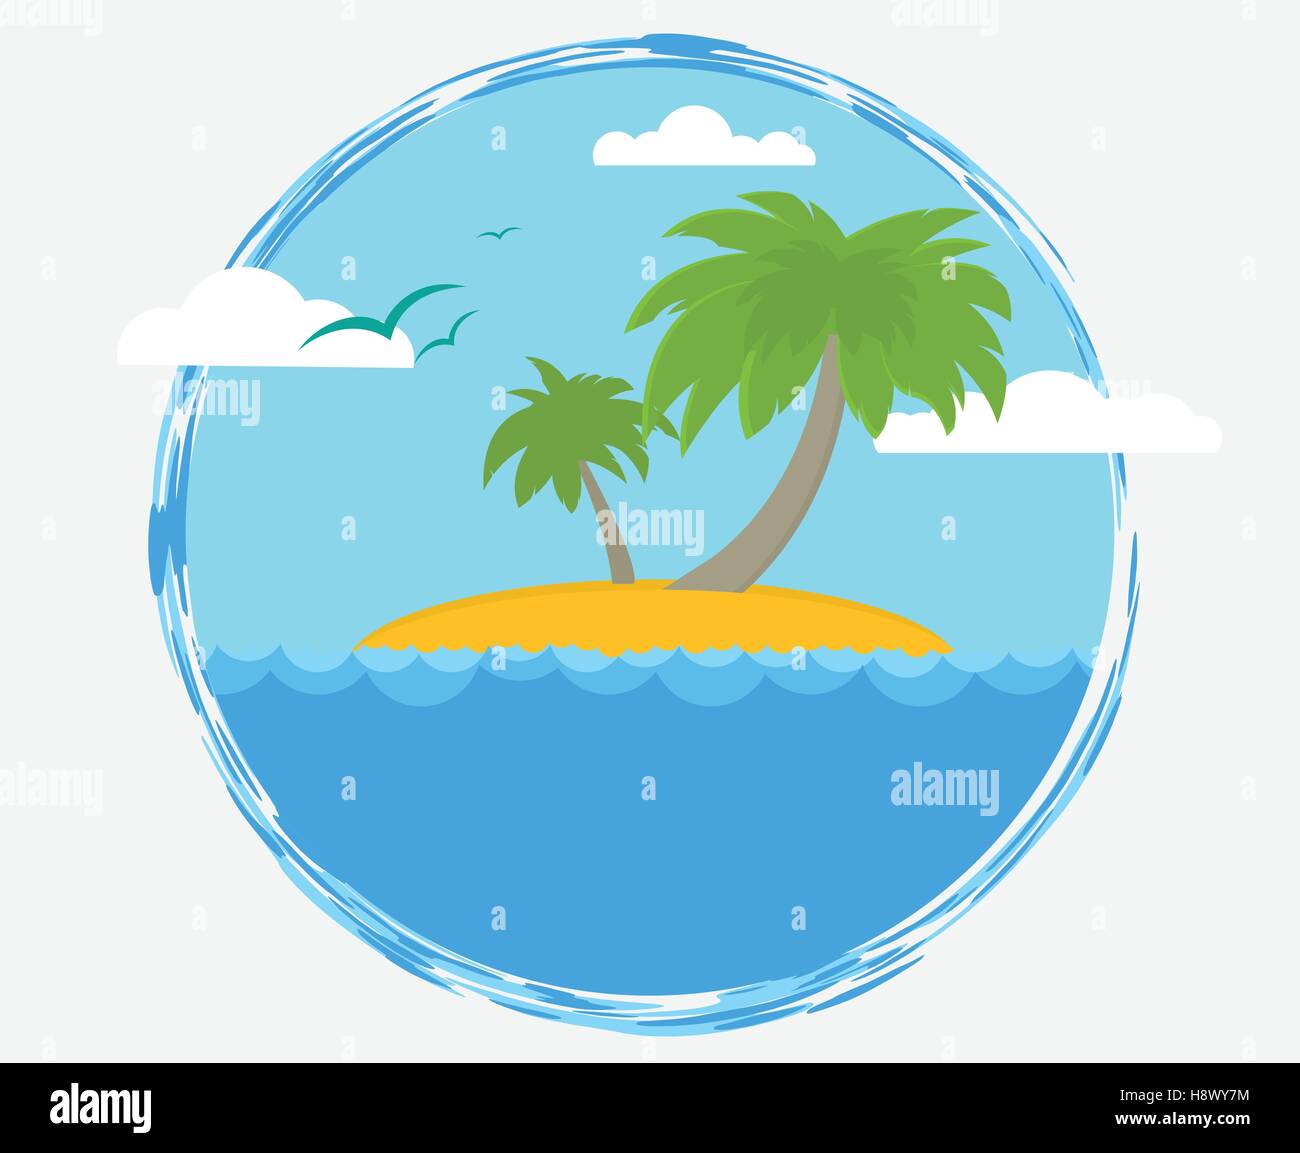 Simple flat label with tourist desert island and ocean. Stock Vector